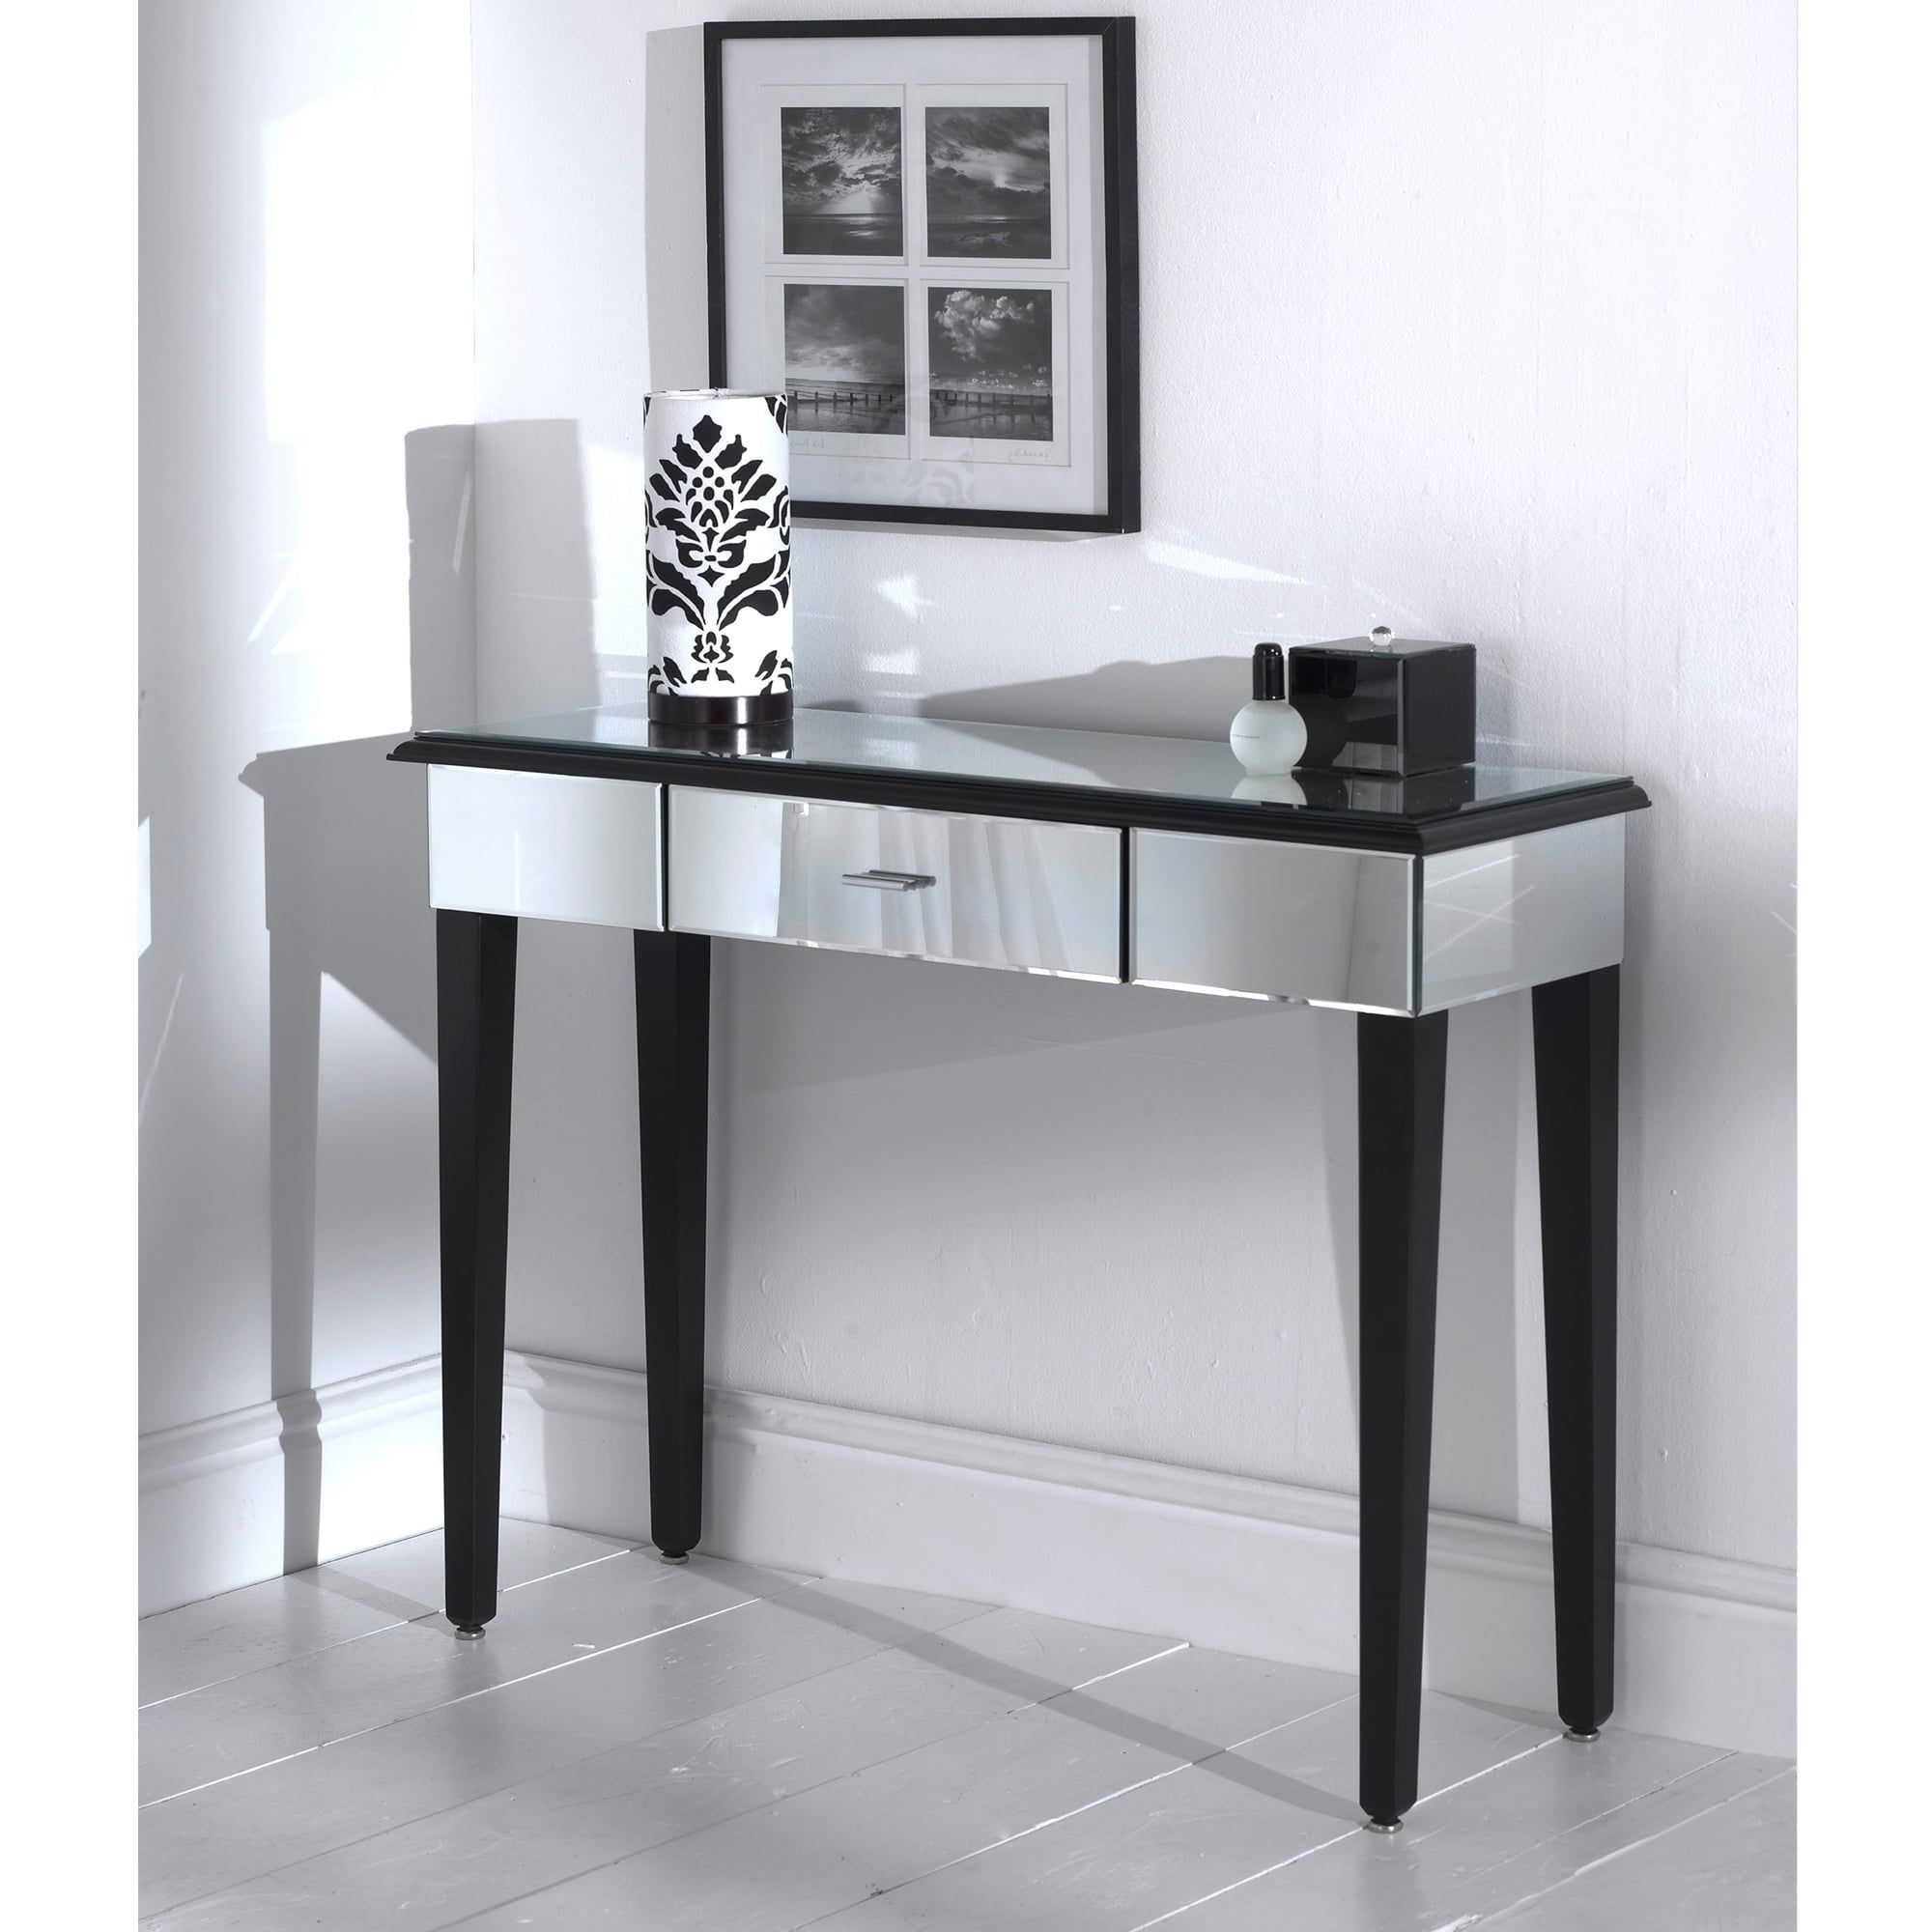 Mirror Console Table Next – Blogert For Newest Mirrored Console Tables (View 5 of 10)